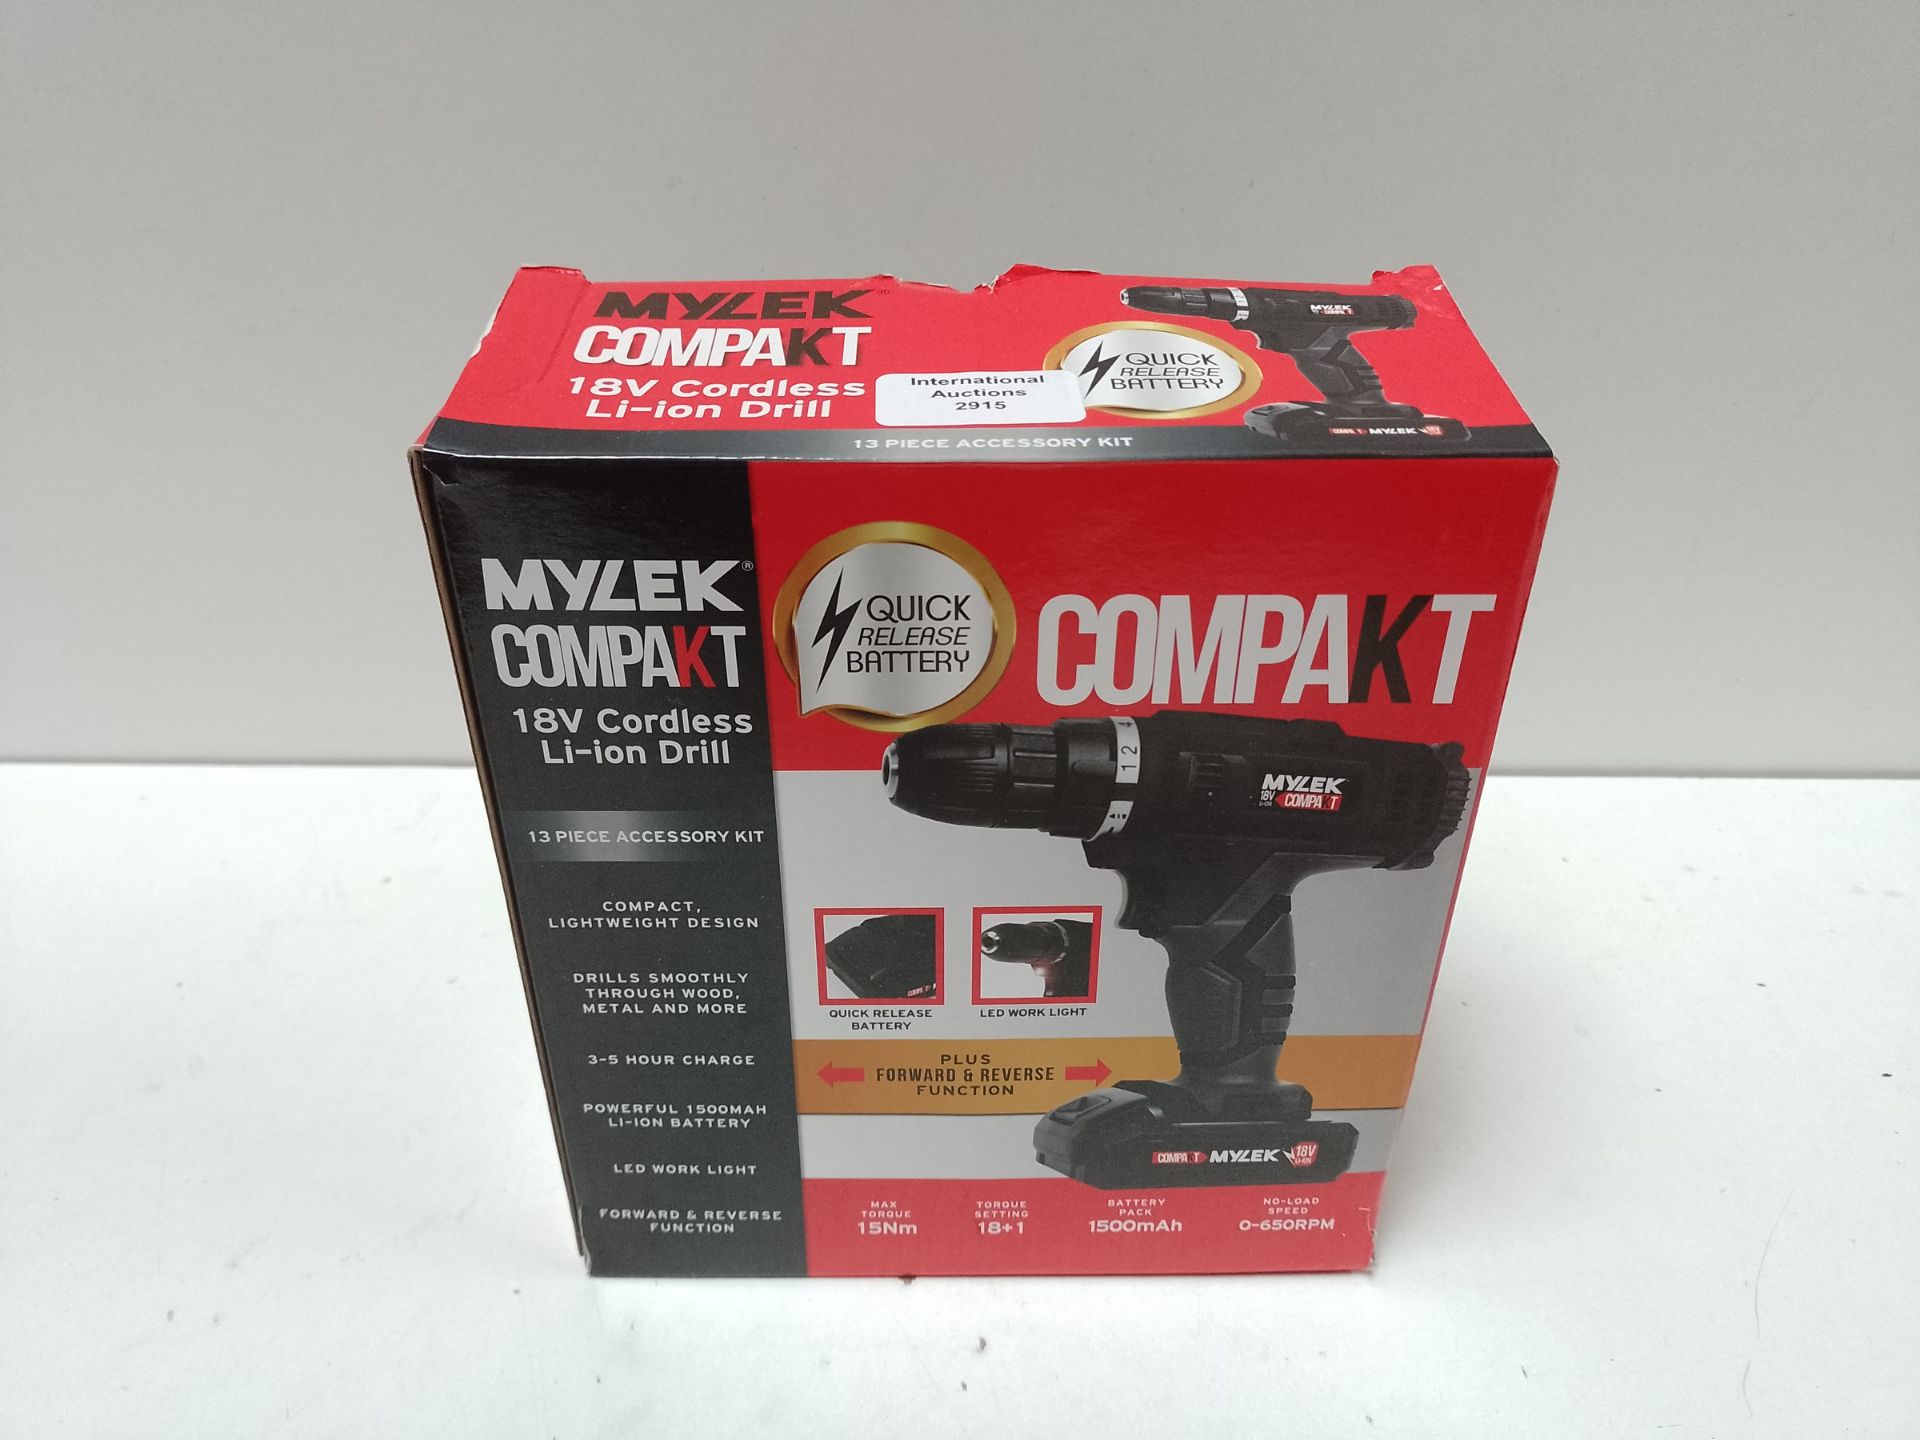 RRP £28.52 MYLEK MYW09 18V Cordless Drill Electric Screwdriver Set - Image 2 of 2